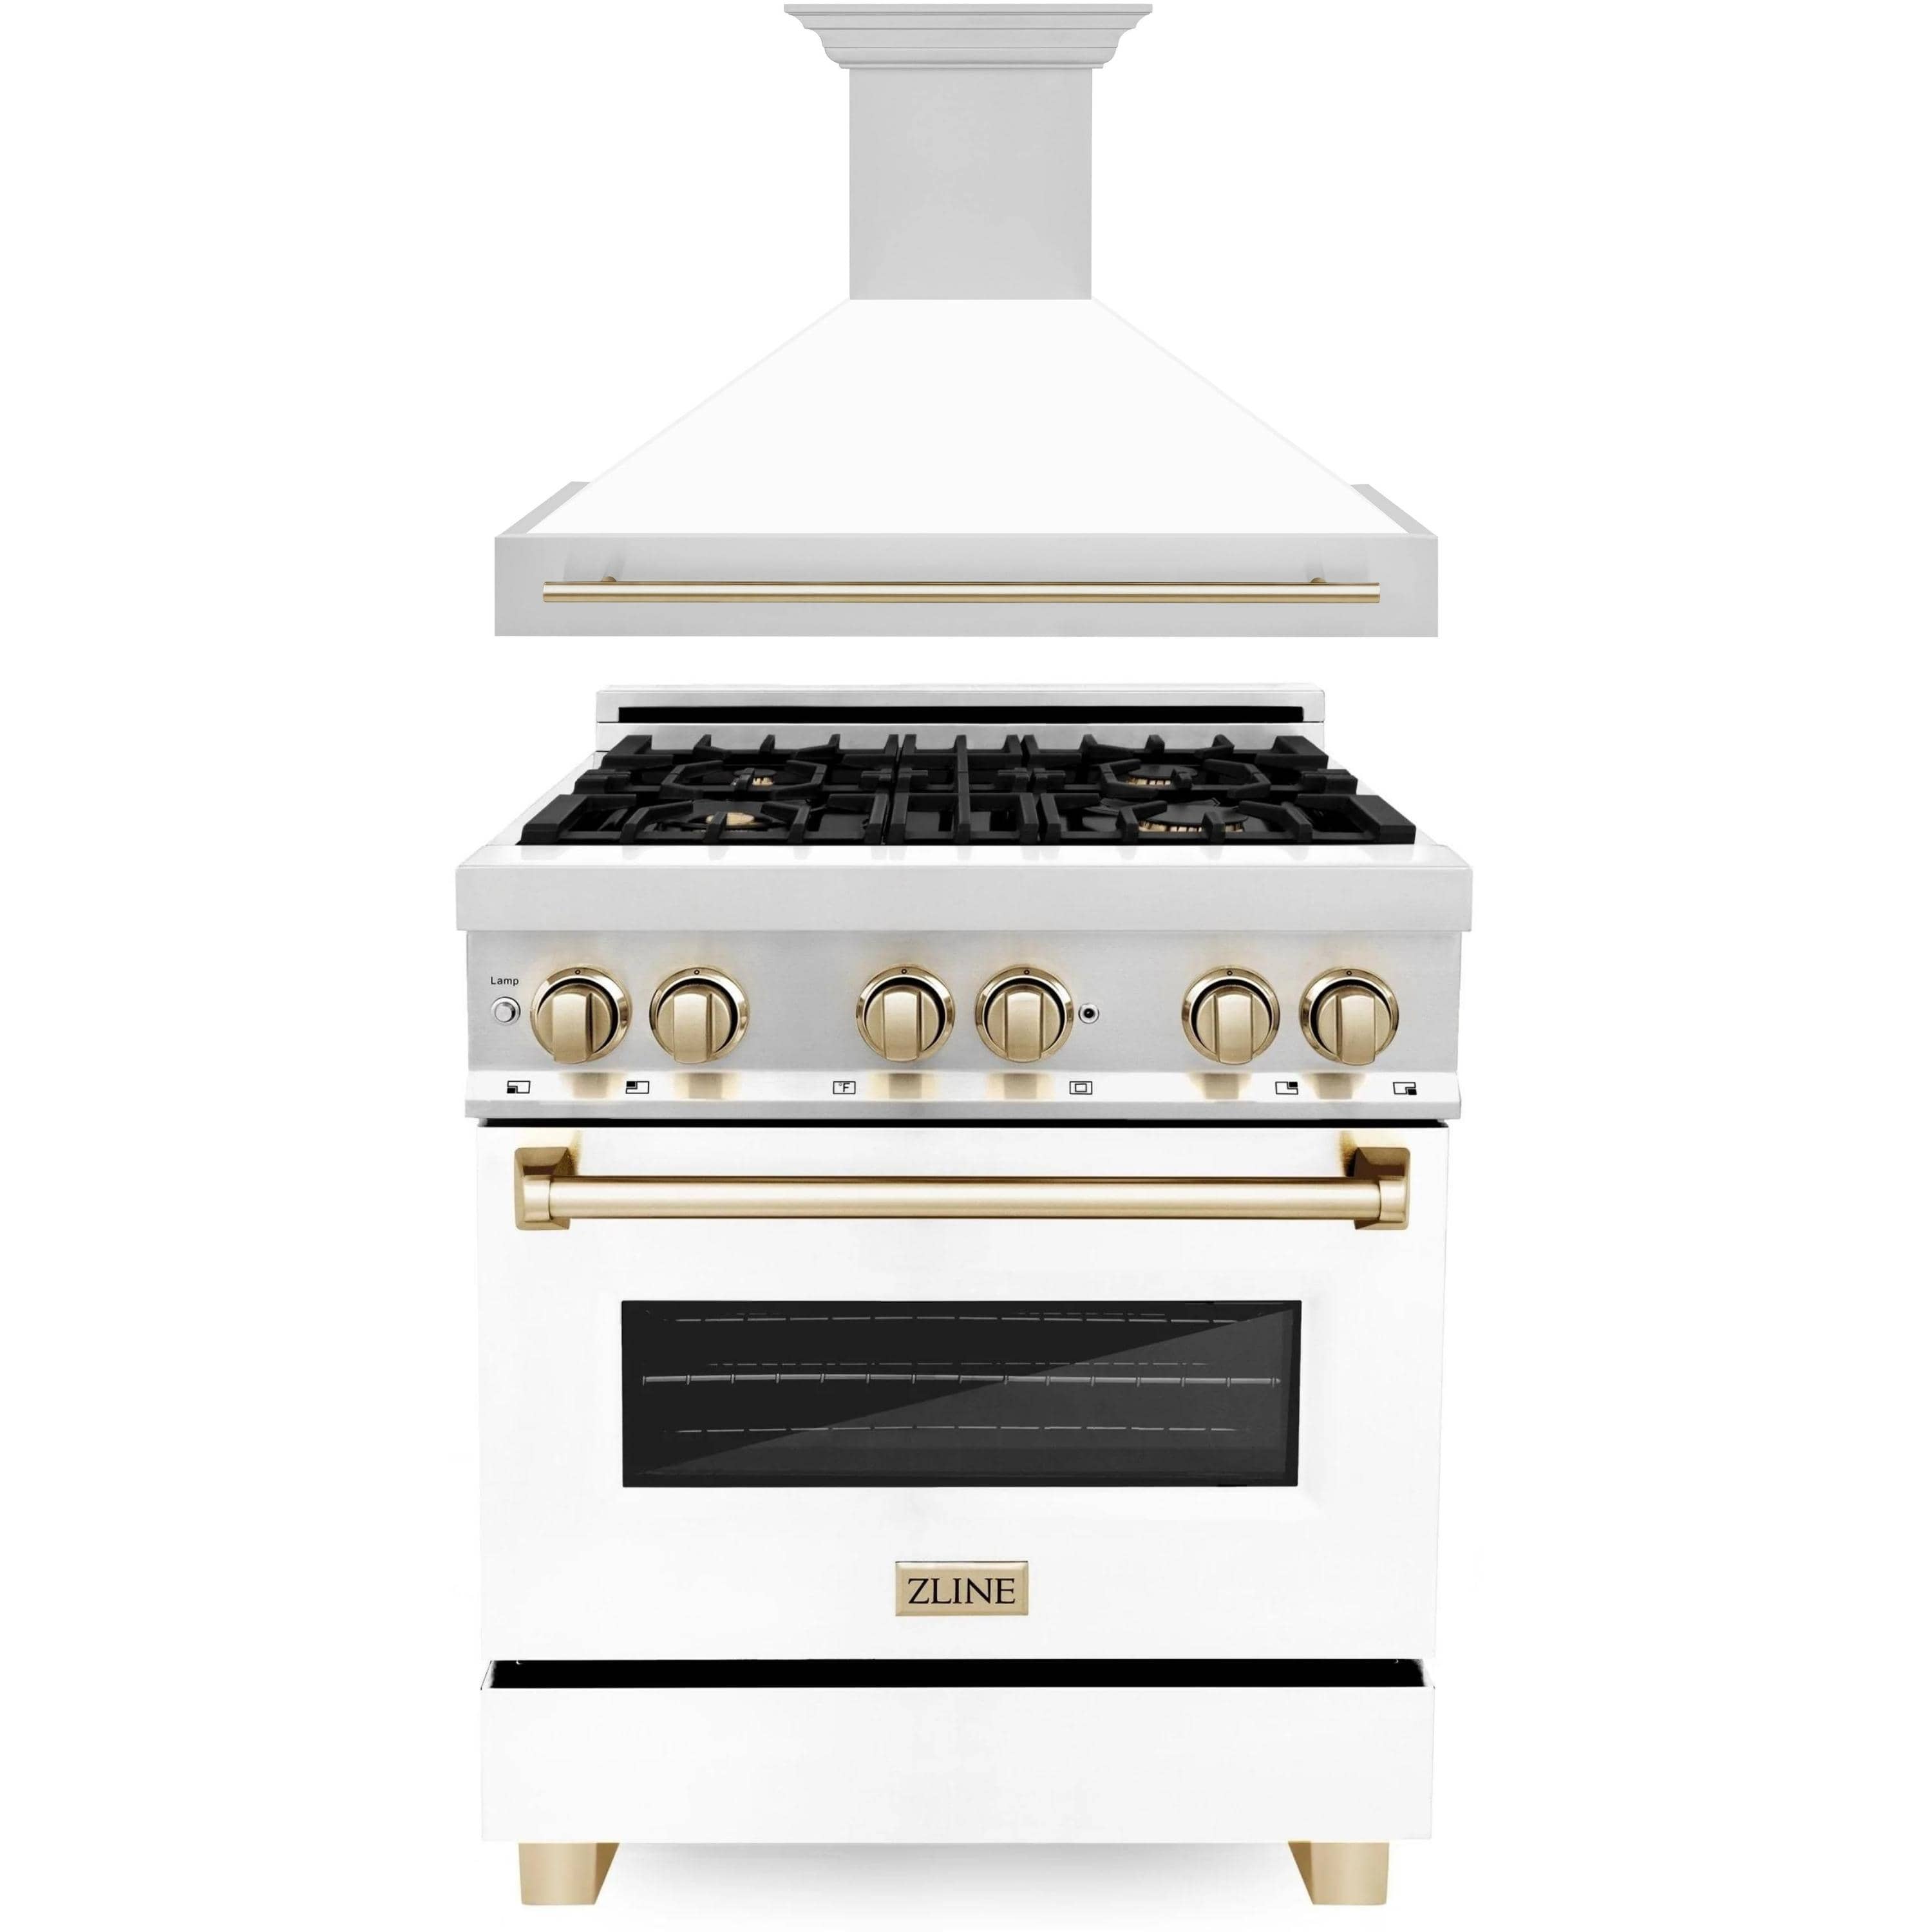 ZLINE Autograph Edition 2-Piece Appliance Package - 30-Inch Dual Fuel Range & Wall Mounted Range Hood in Stainless Steel and White Door with Gold Trim (2AKP-RAWMRH30-G)